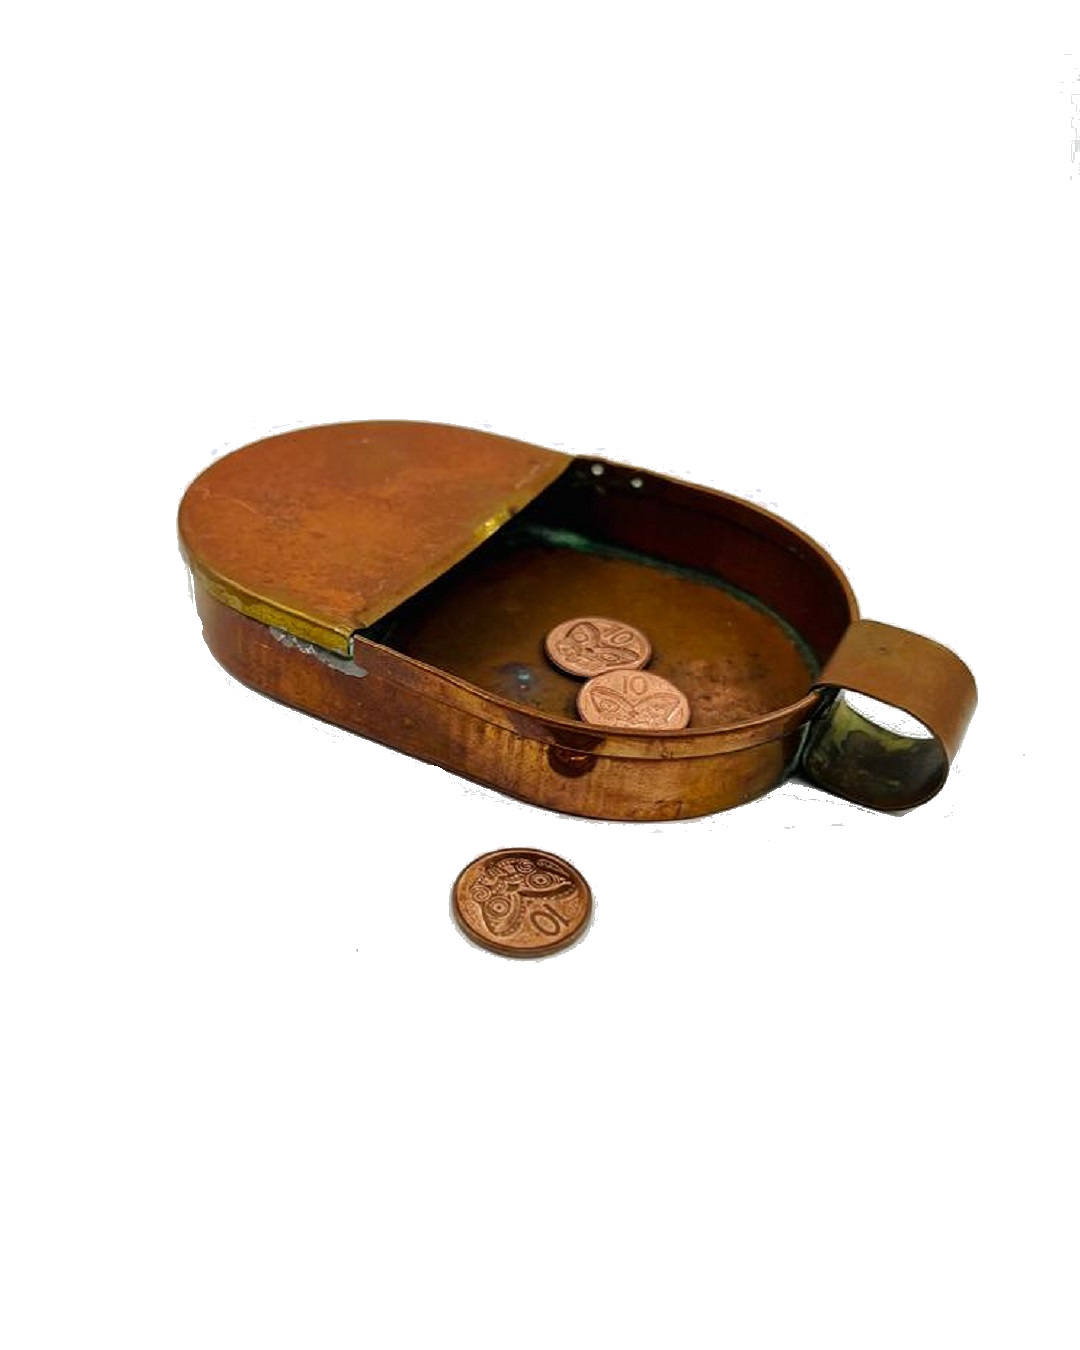 Copper money collecting dish